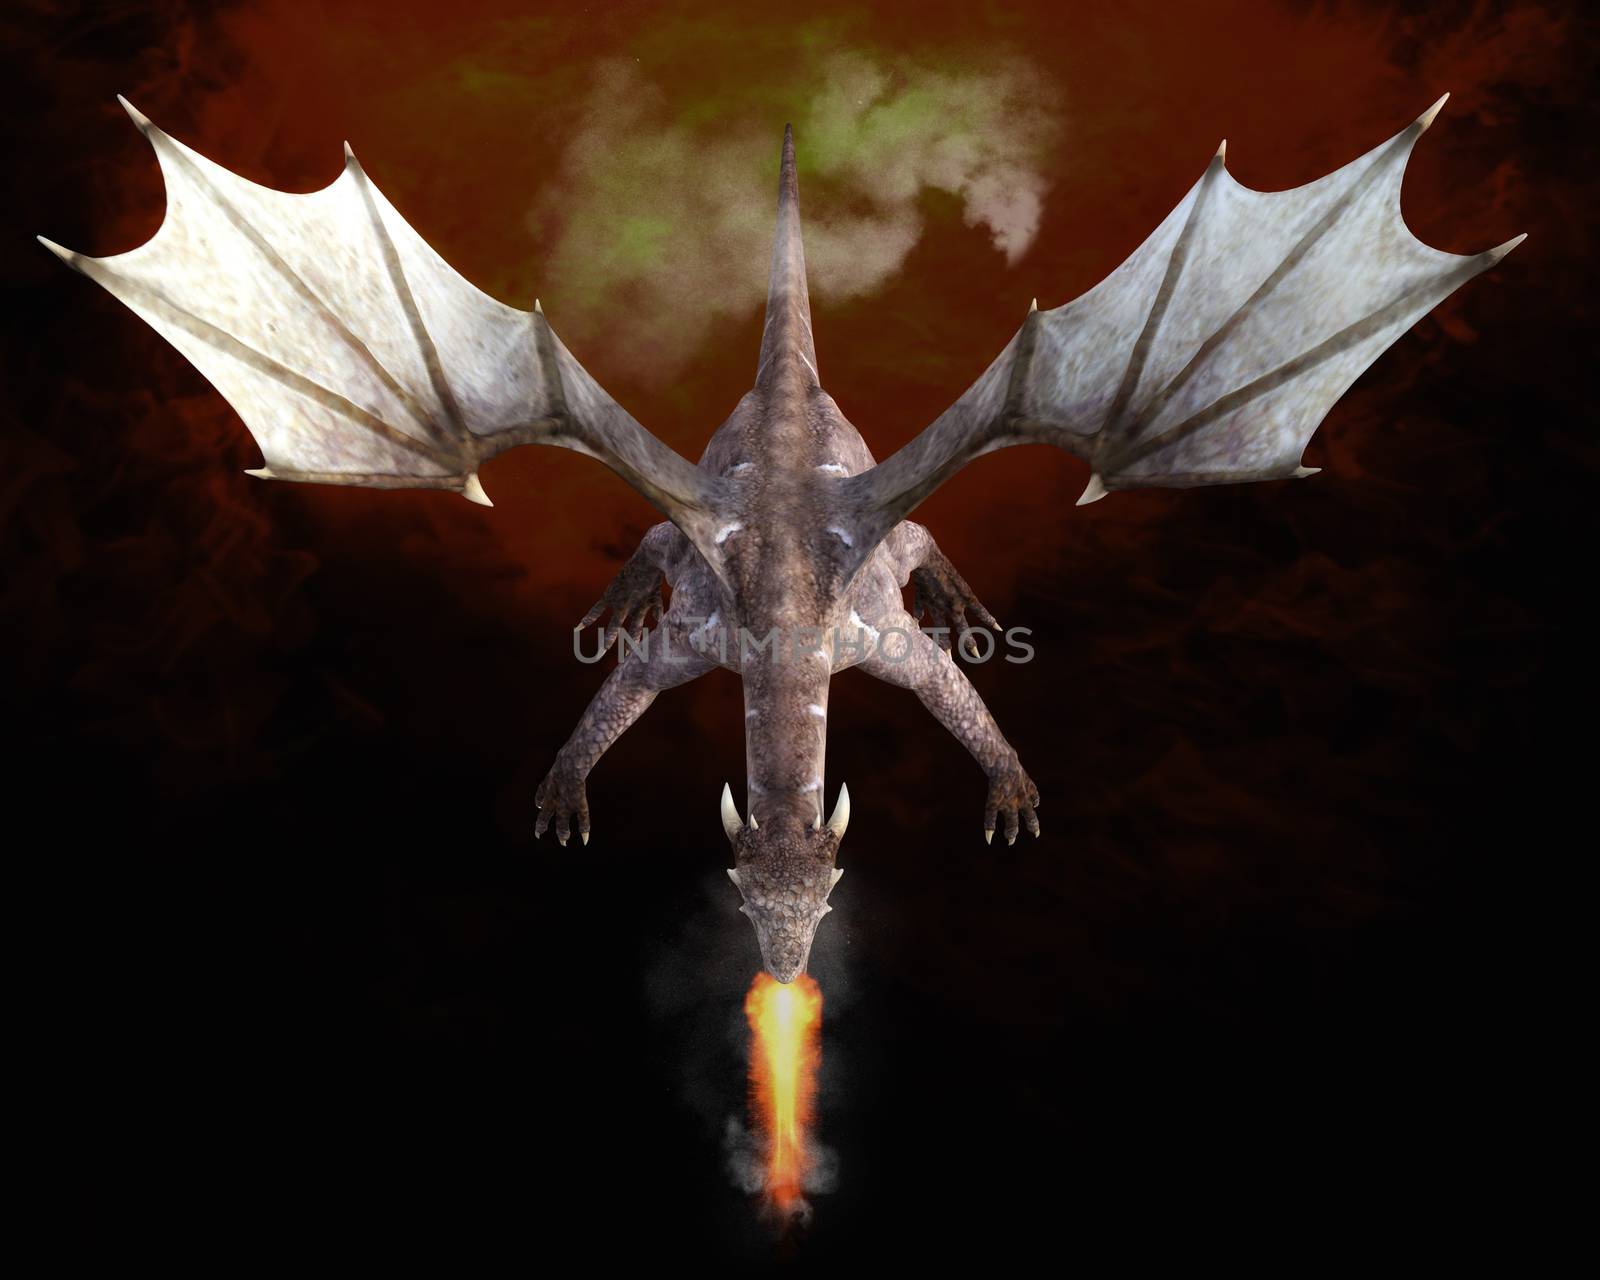 3D Illustration; 3D Rendering of a Dragon by 3quarks